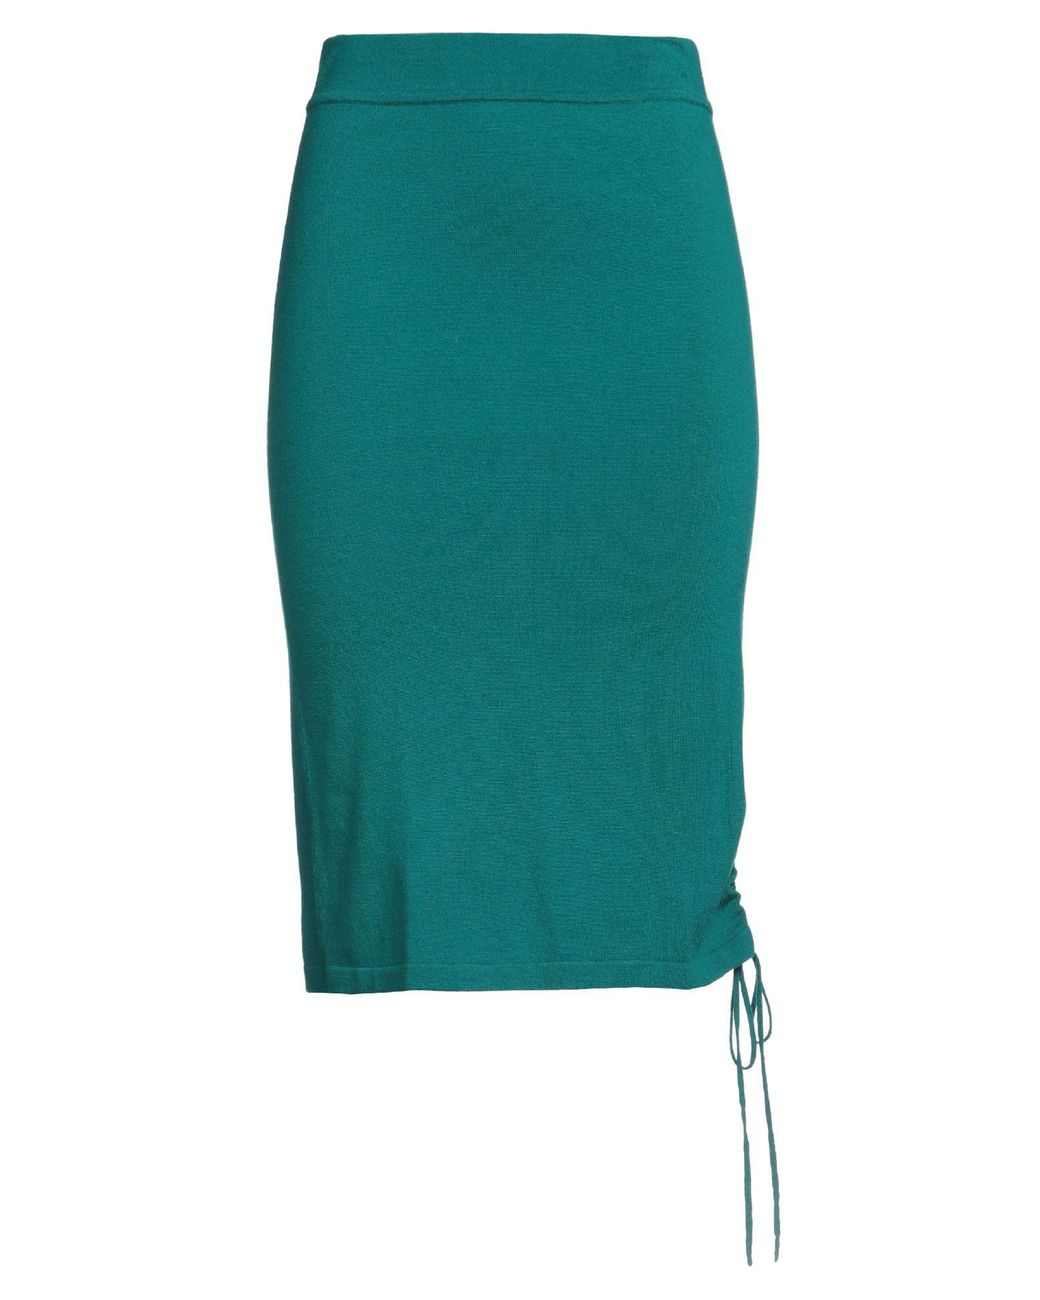 P.A.R.O.S.H. Midi Skirt in Green | Lyst